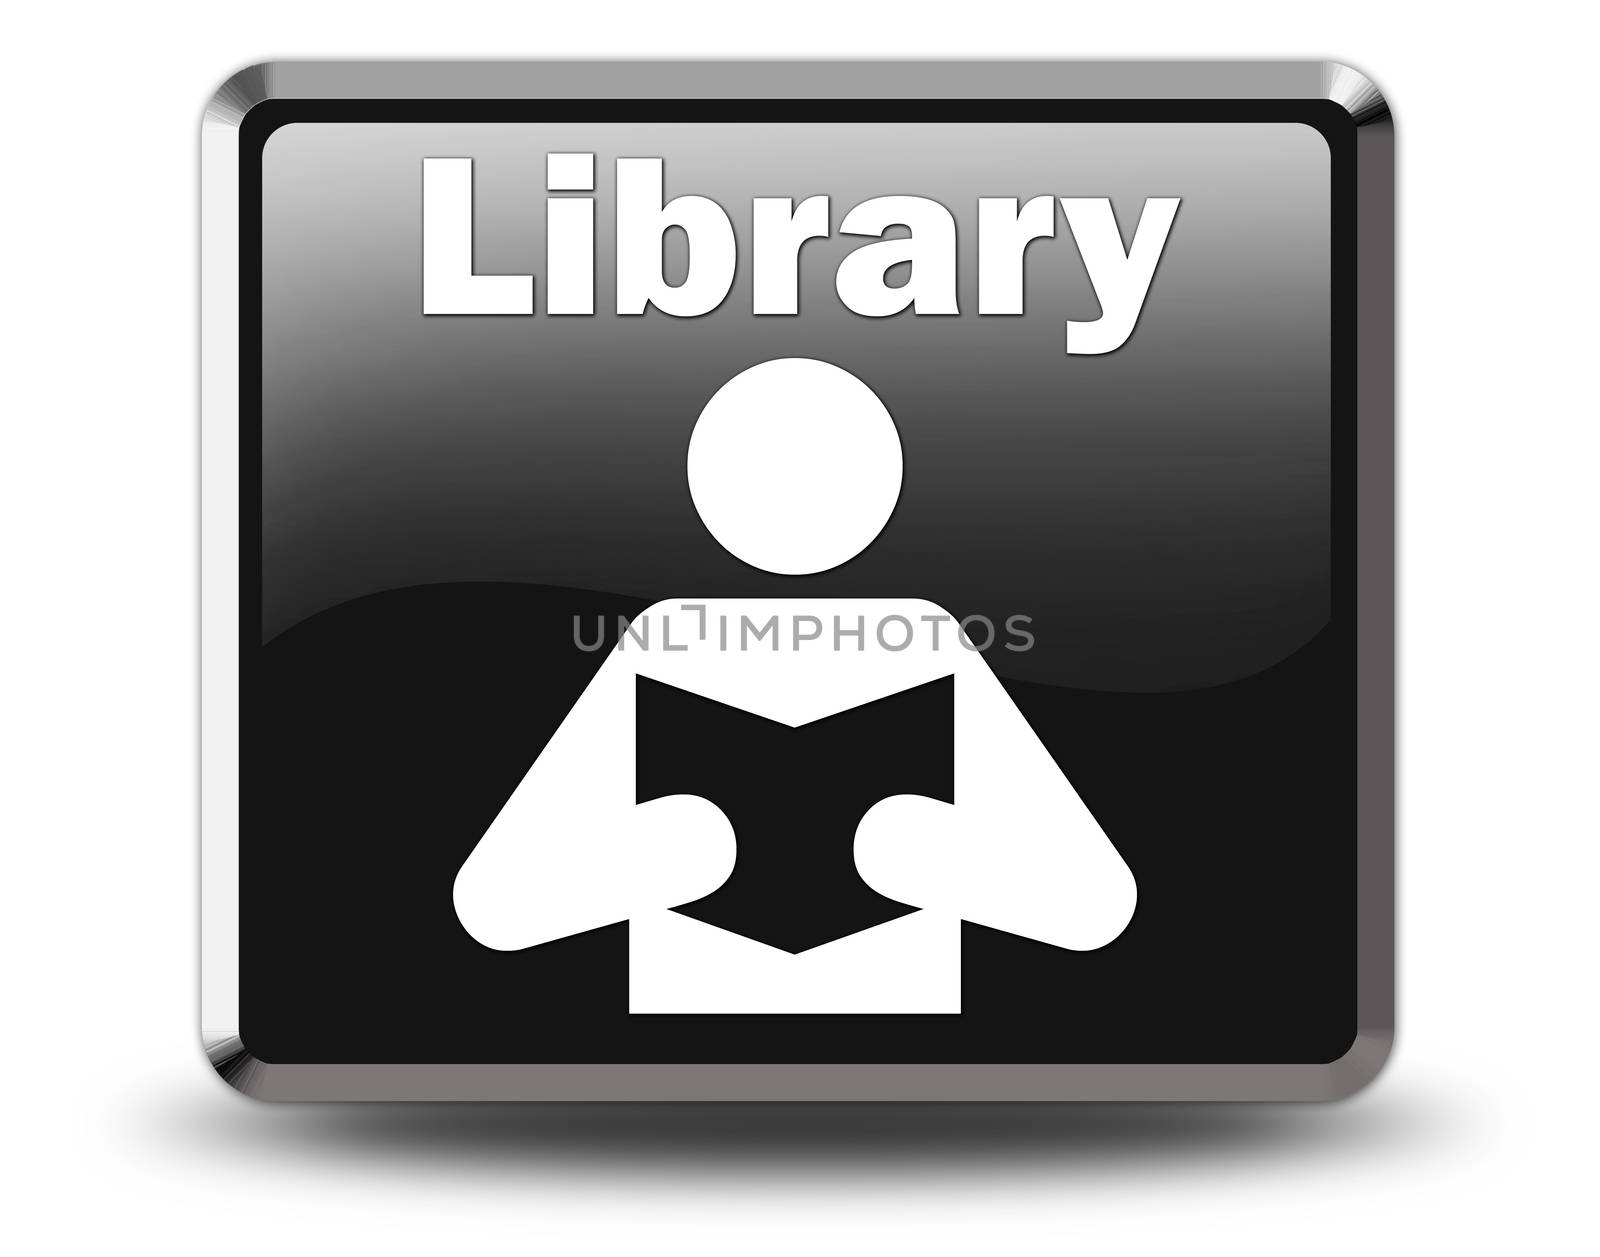 Icon, Button, Pictogram with Library symbol